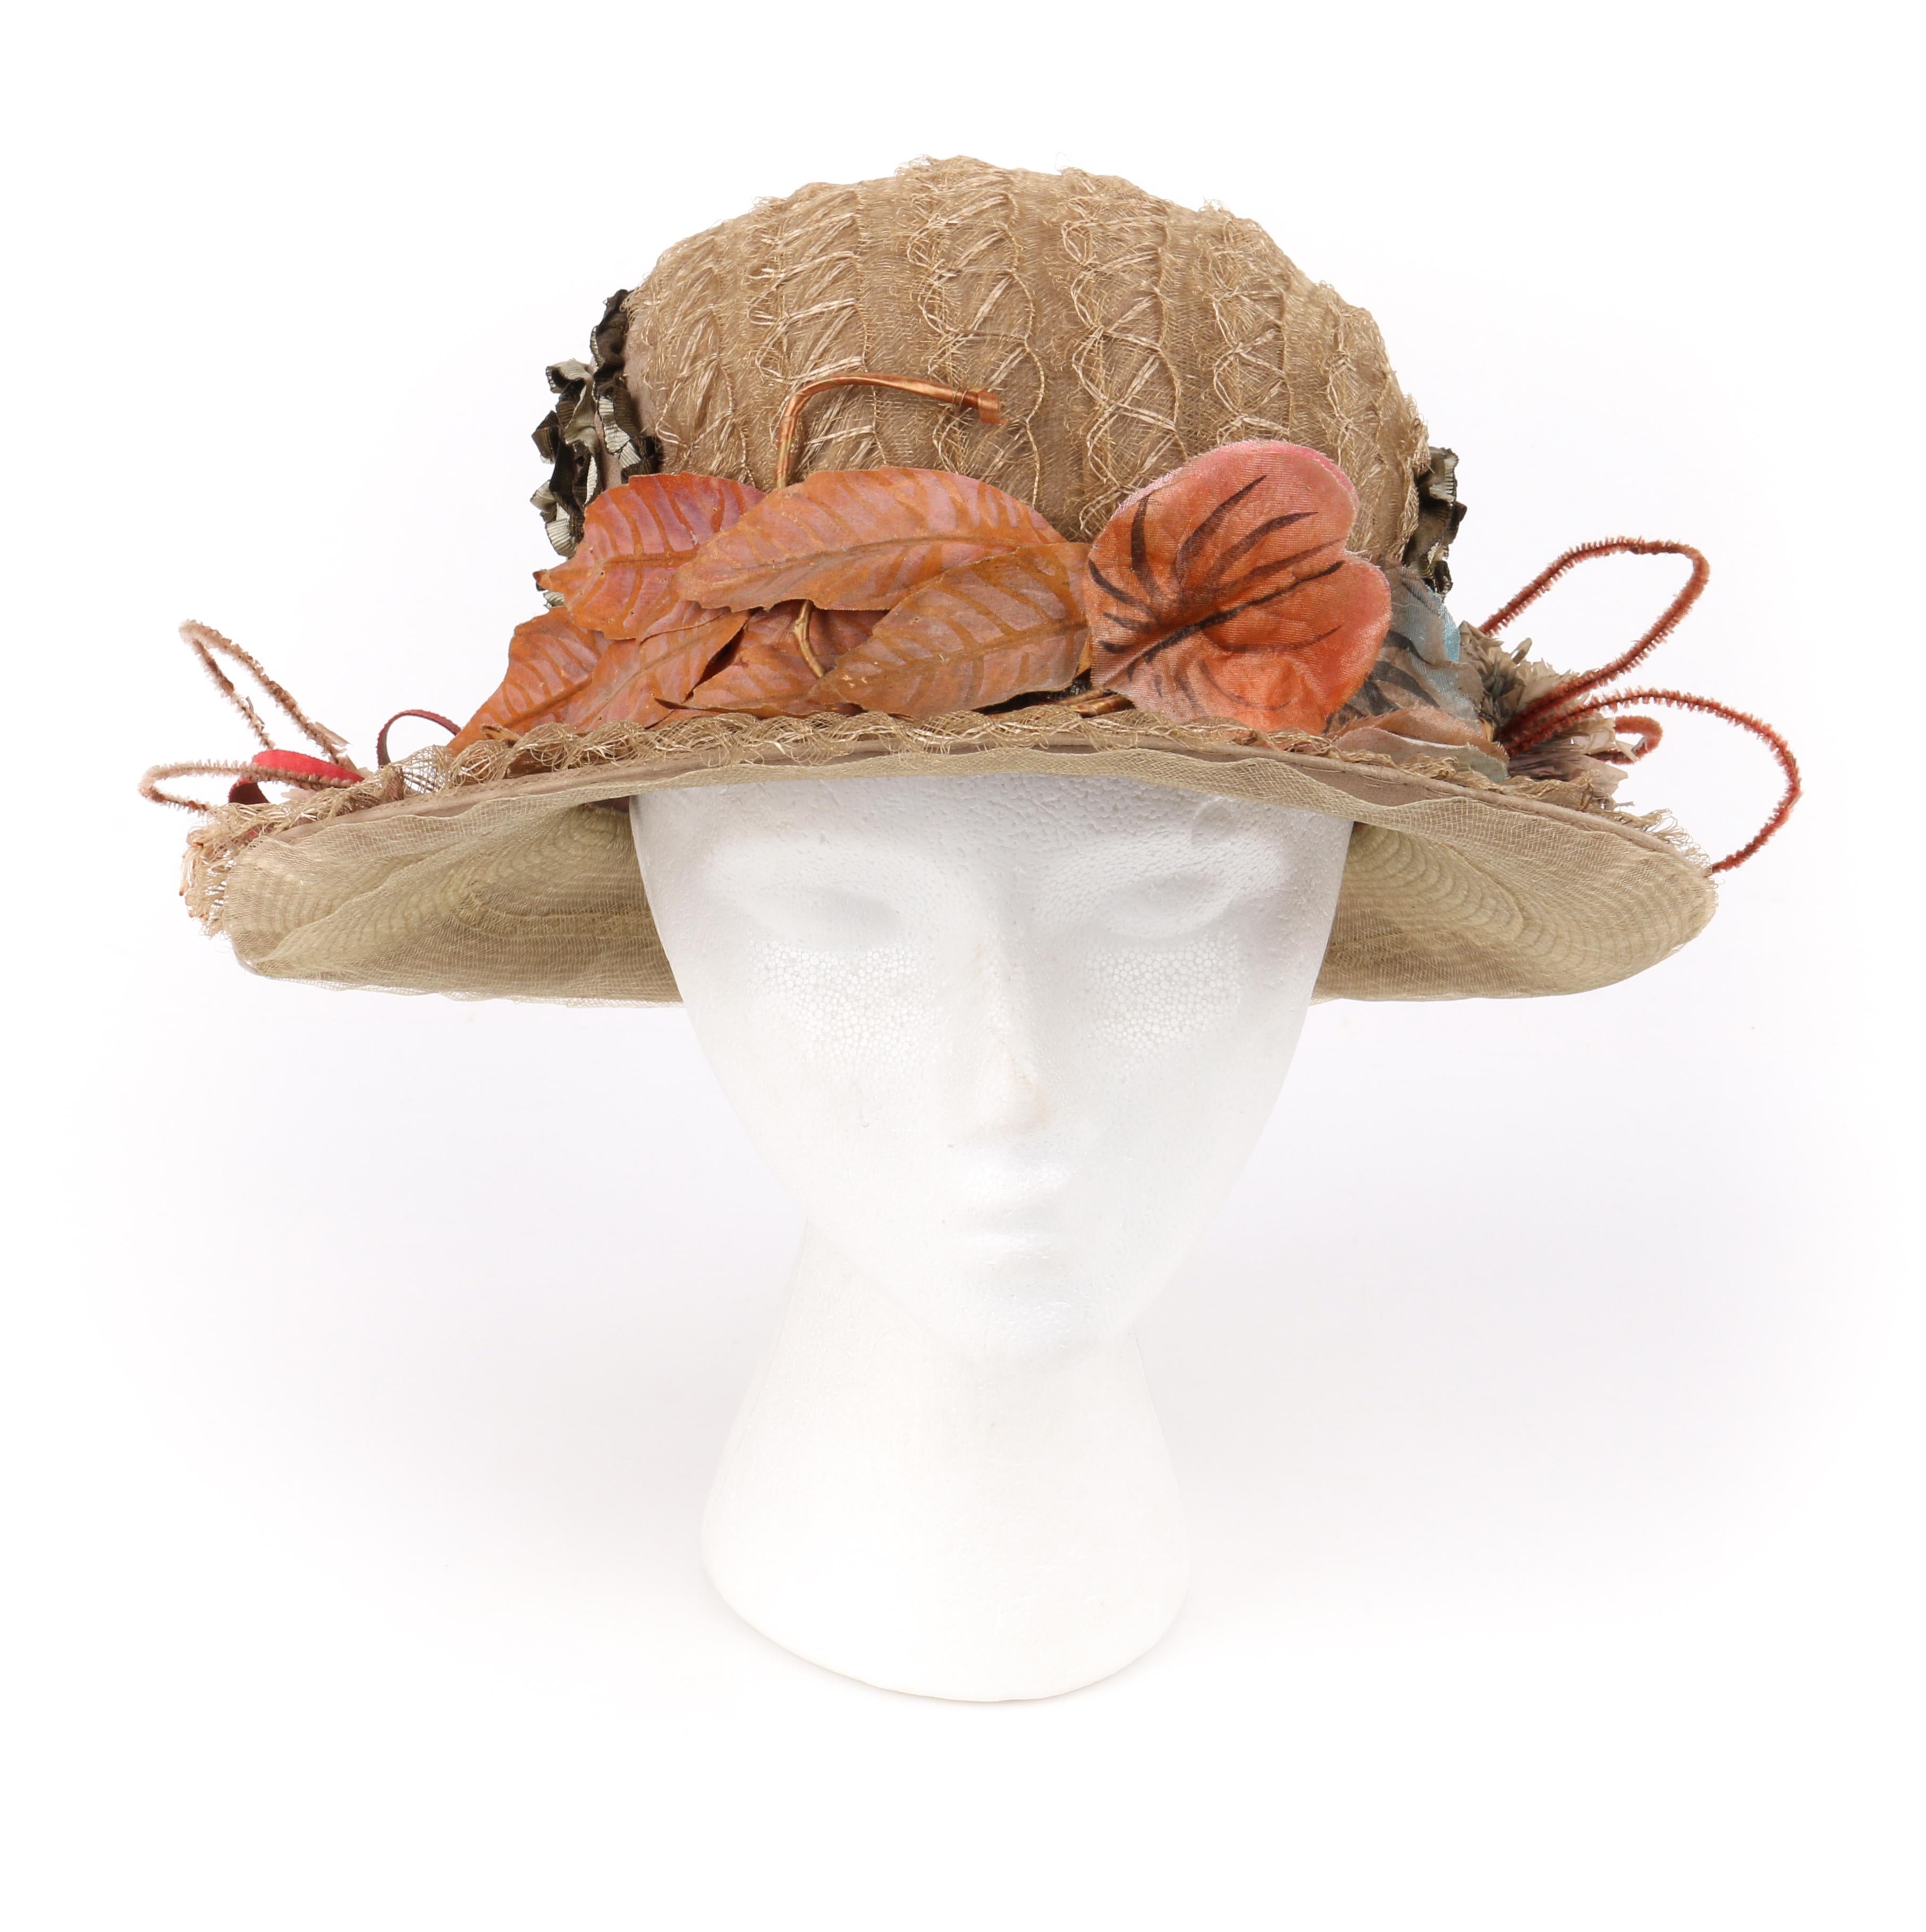 DESCRIPTION: EDWARDIAN c.1900's Beige Scalloped Horsehair Floral Autumn Leaf Afternoon Hat 
 
Circa: c.1900’s
Label(s): None
Style: Afternoon hat
Color(s): Multi
Lined: Yes
Unmarked Fabric Content (feel of): Horsehair; Silk; Straw
Additional Details